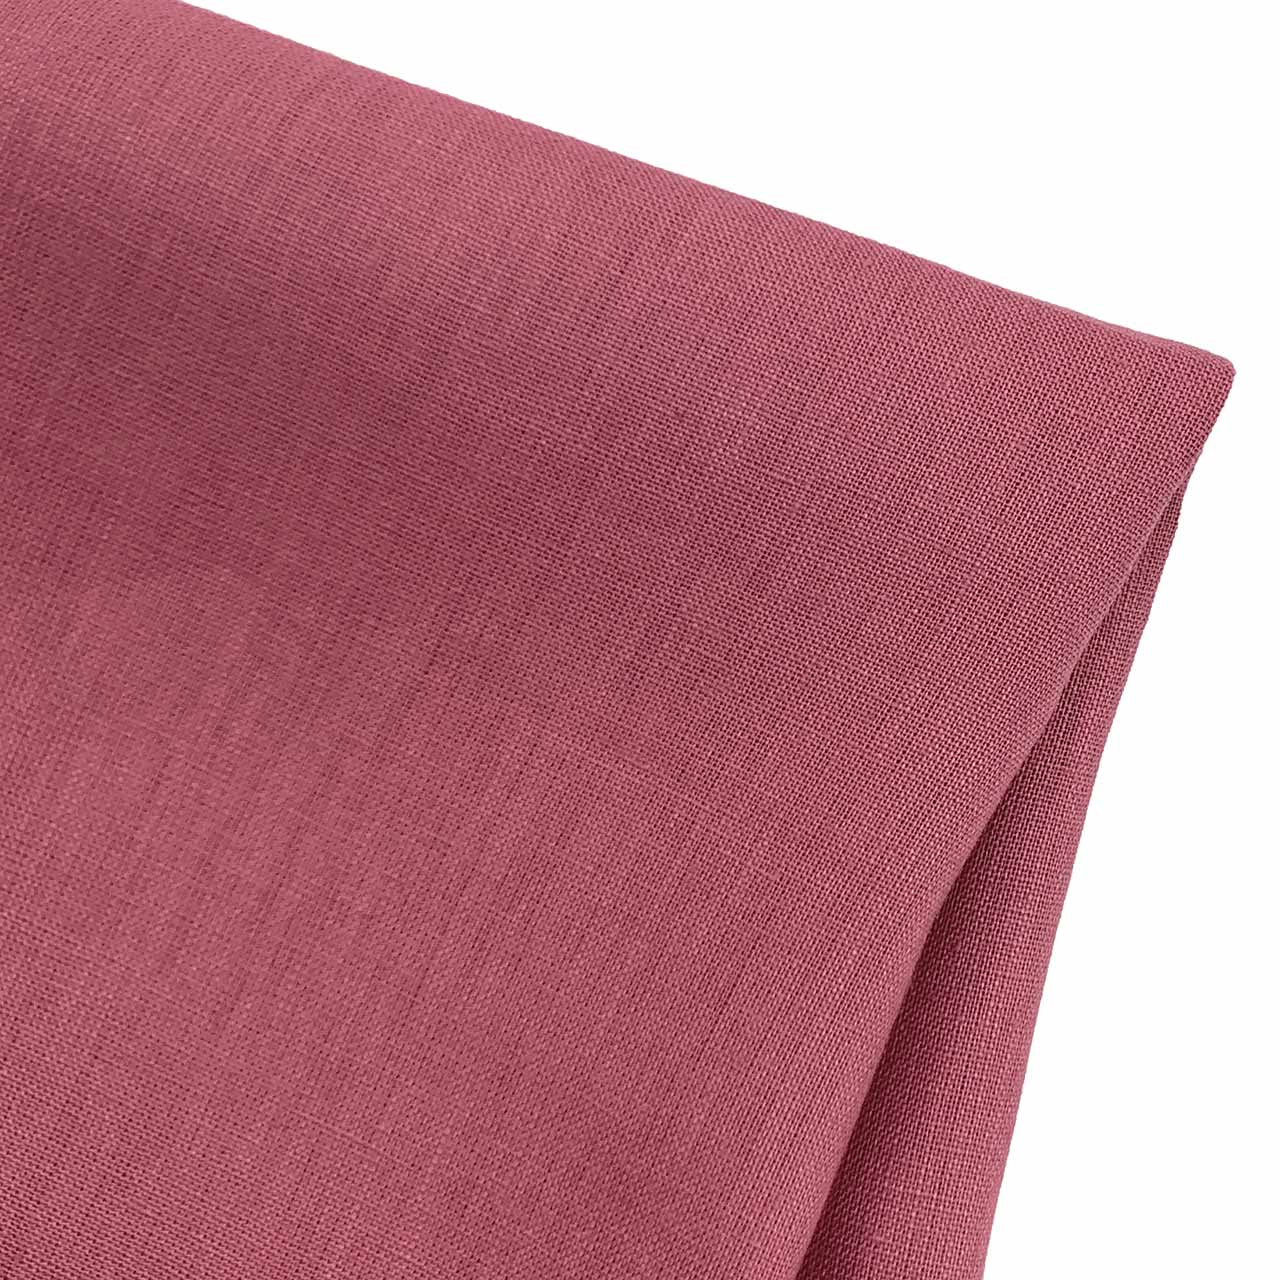 musk pink linen fabric - Fabric Collection